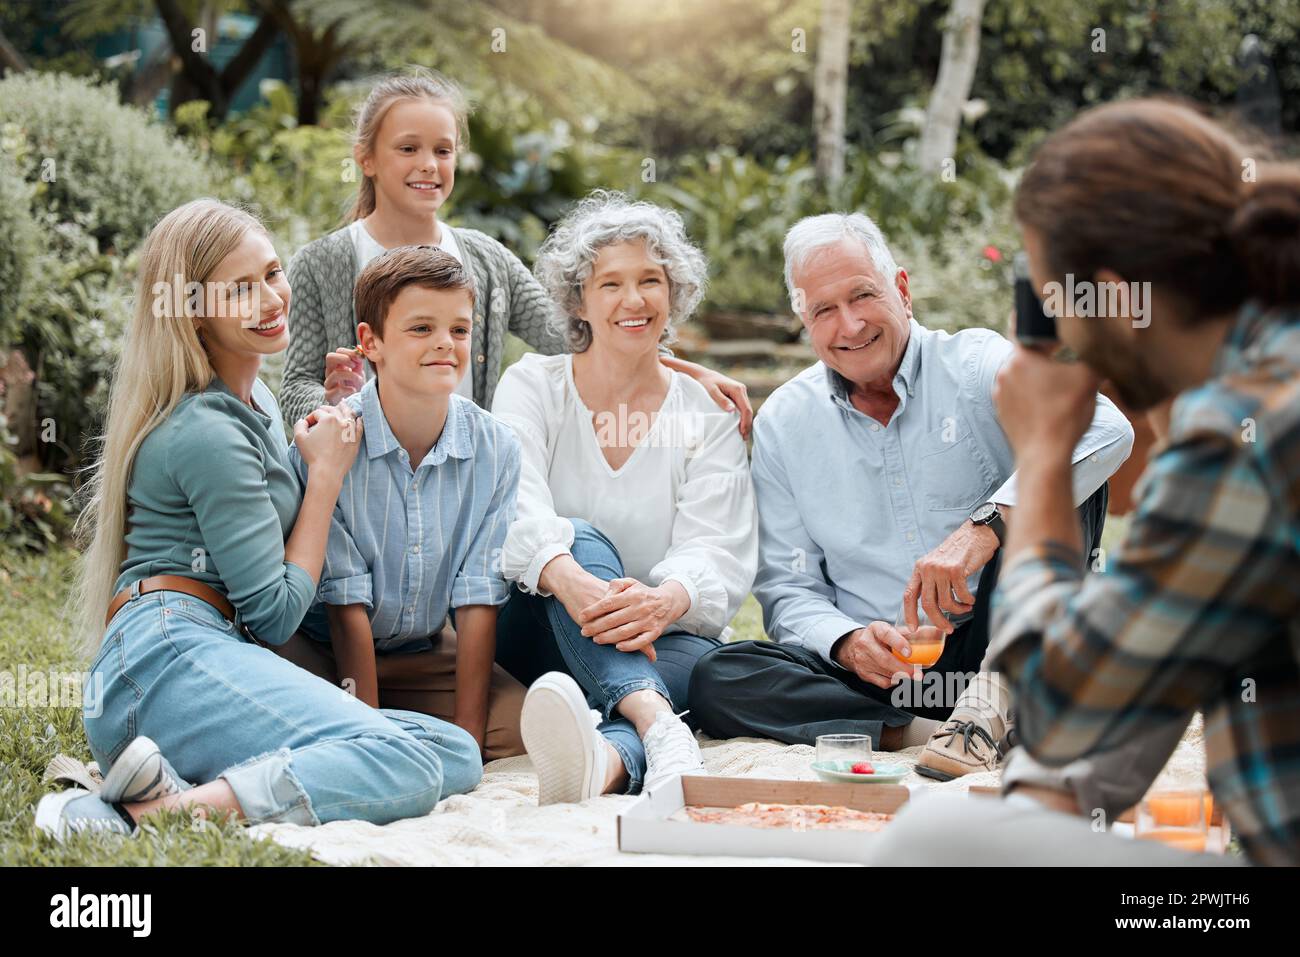 On the count of three. a multi-generational family spending time together outdoors Stock Photo